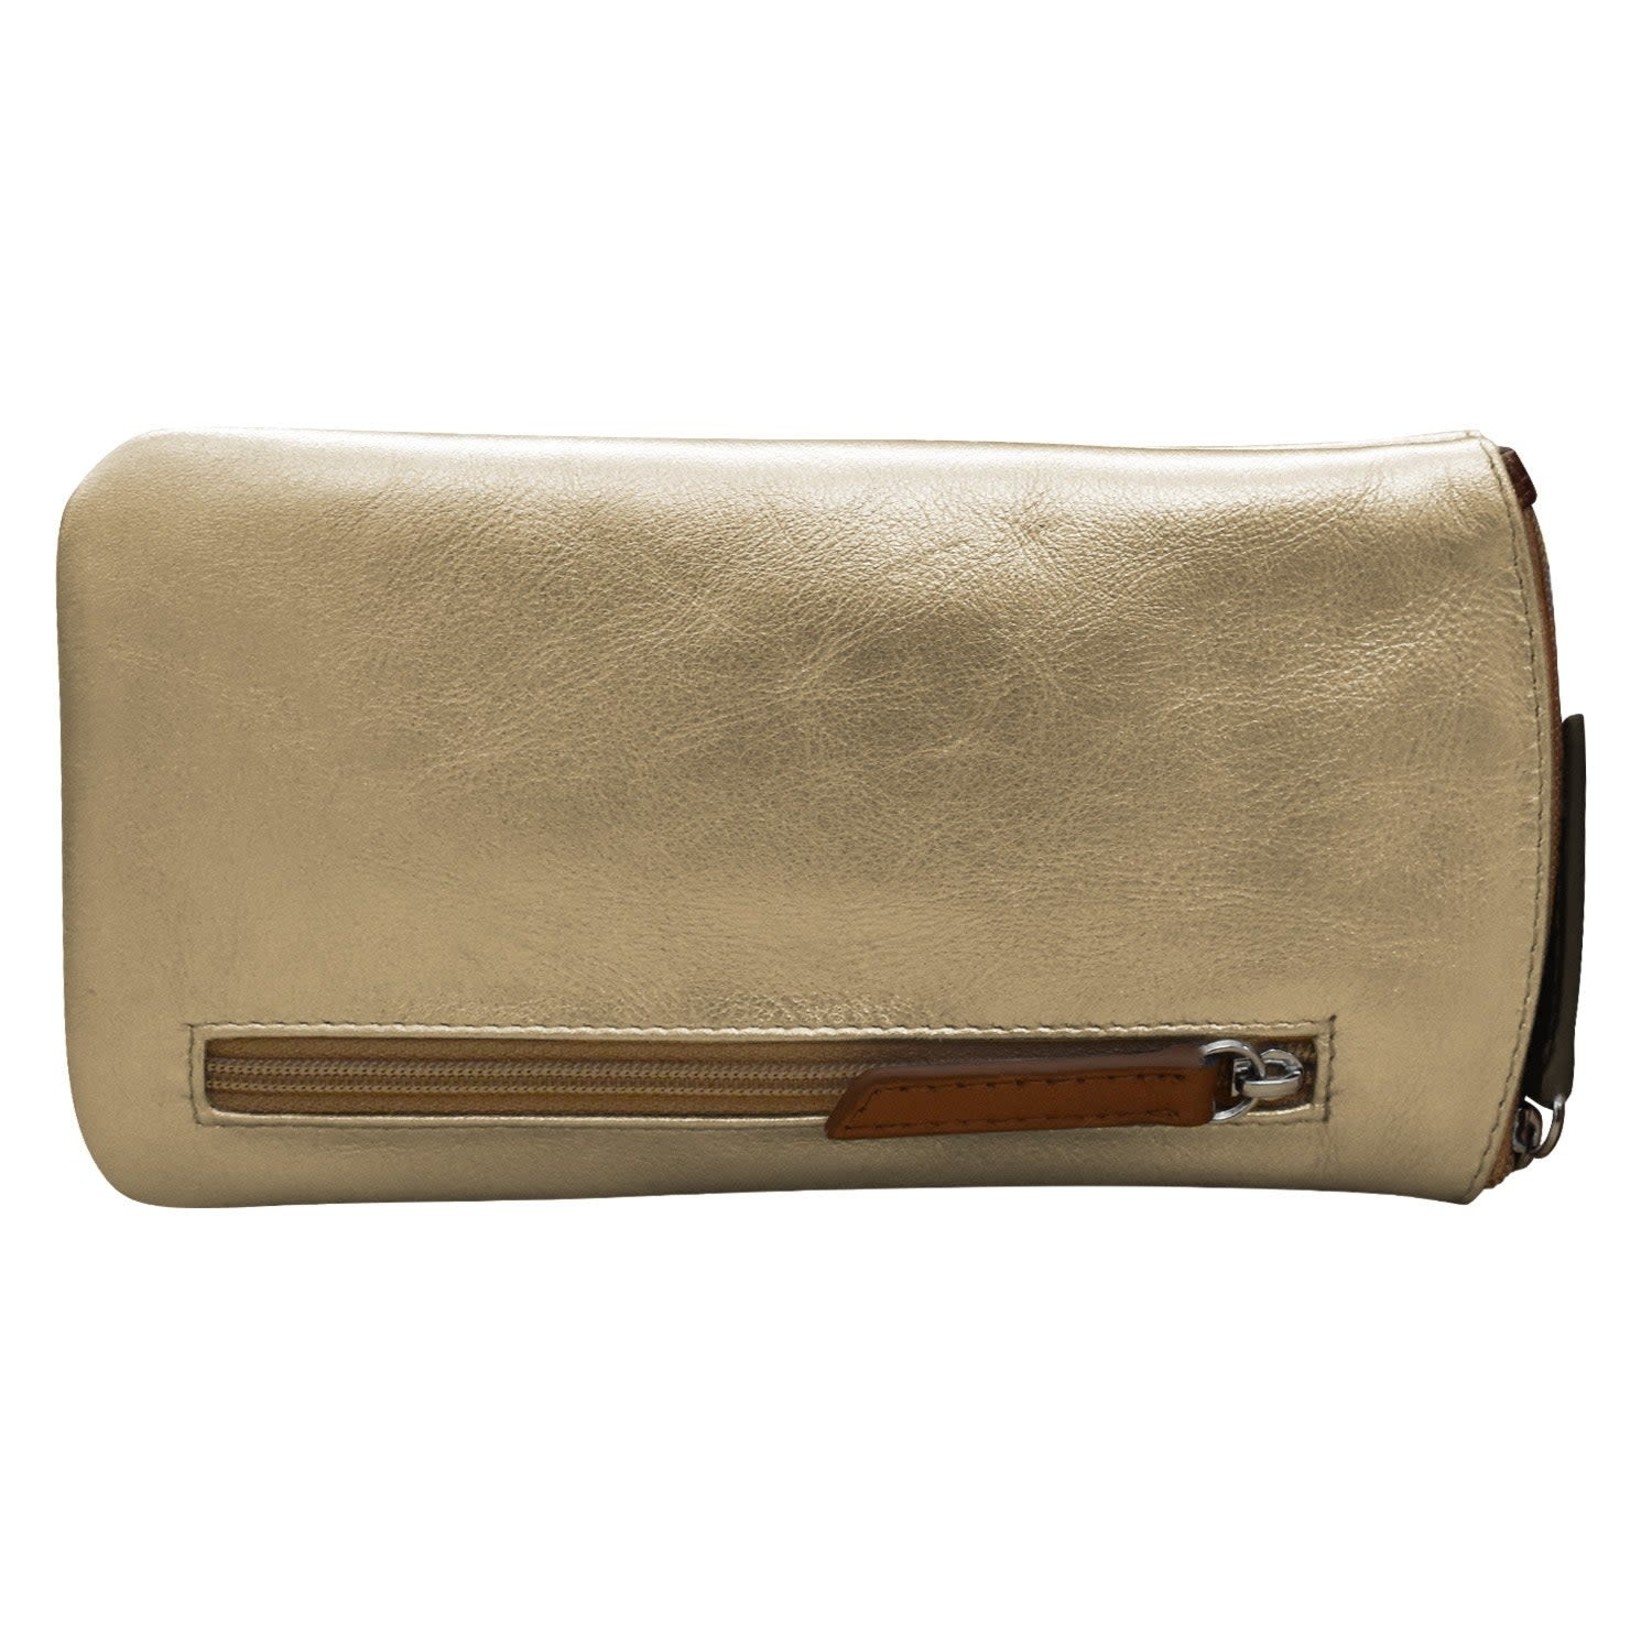 Leather Handbags and Accessories 6462 Light Gold/Bronze - Leather Eyeglass Case